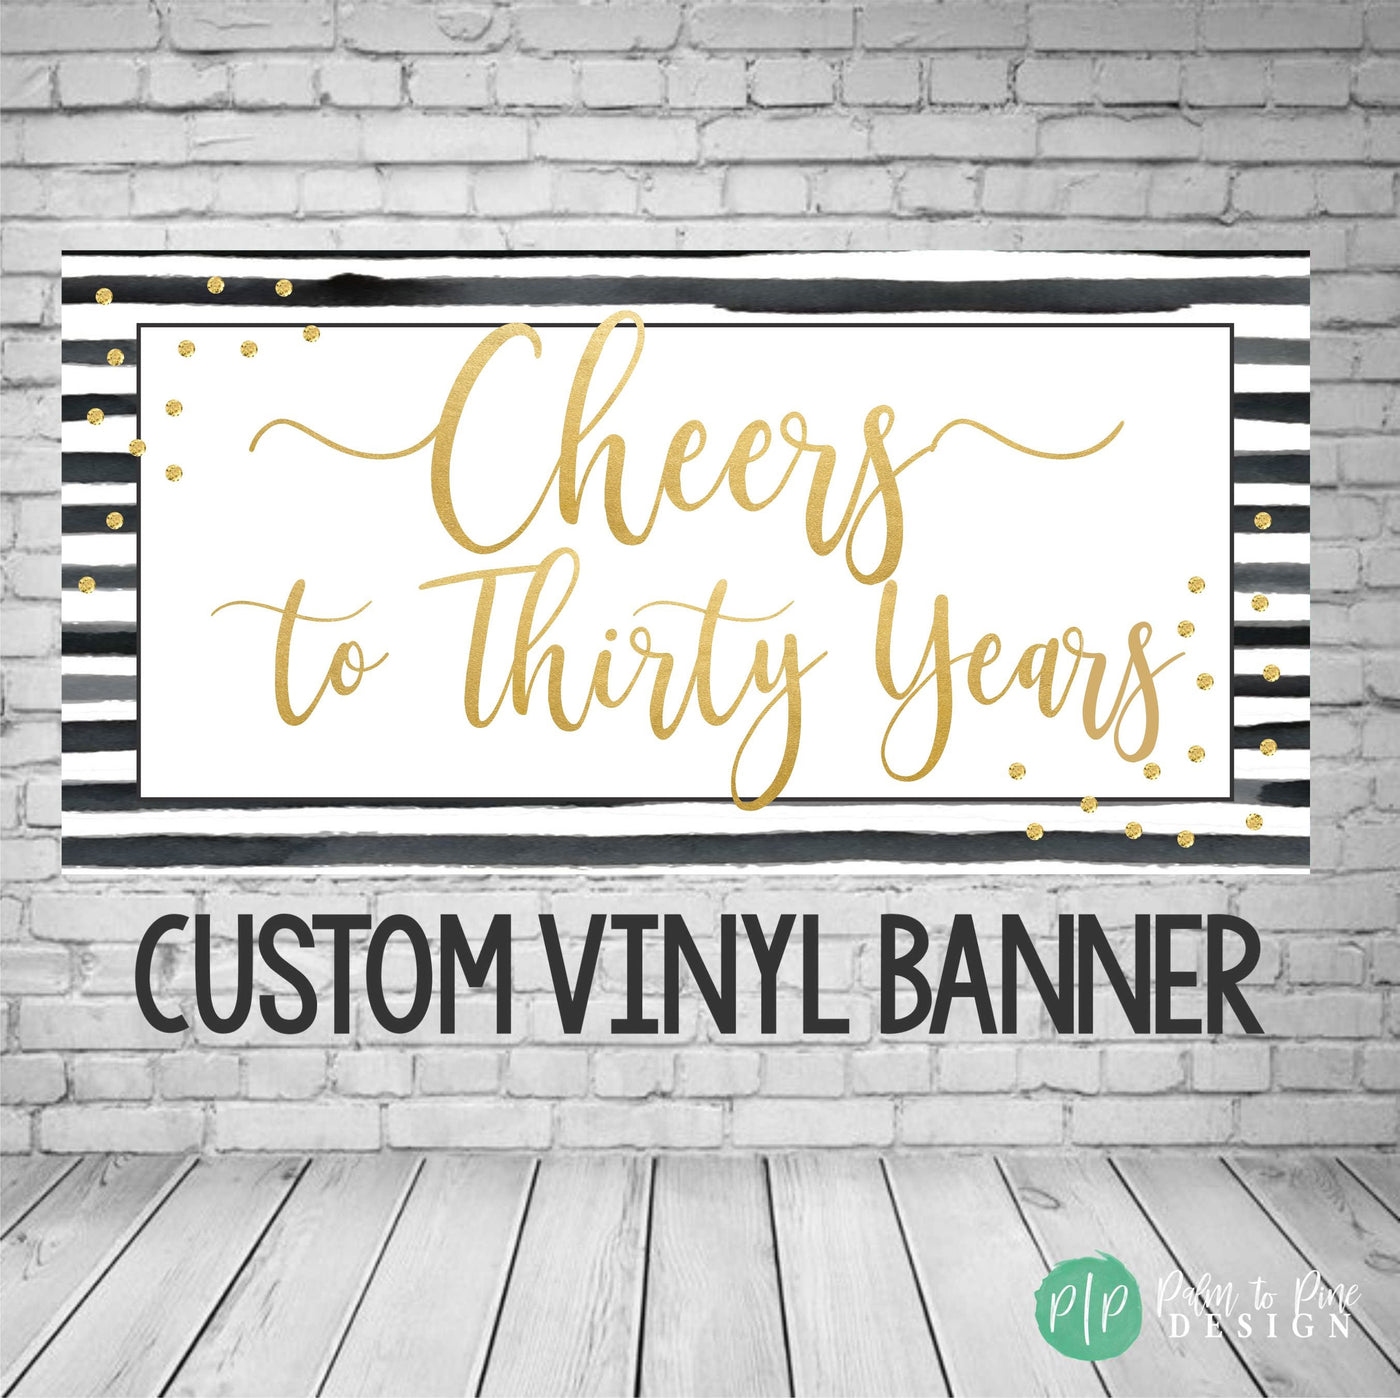 50th Birthday Banner, Adult Birthday Party Decor, Black and Gold Birthday Party, Cheers to 50 years banner, Birthday Banner Backdrop, 40th